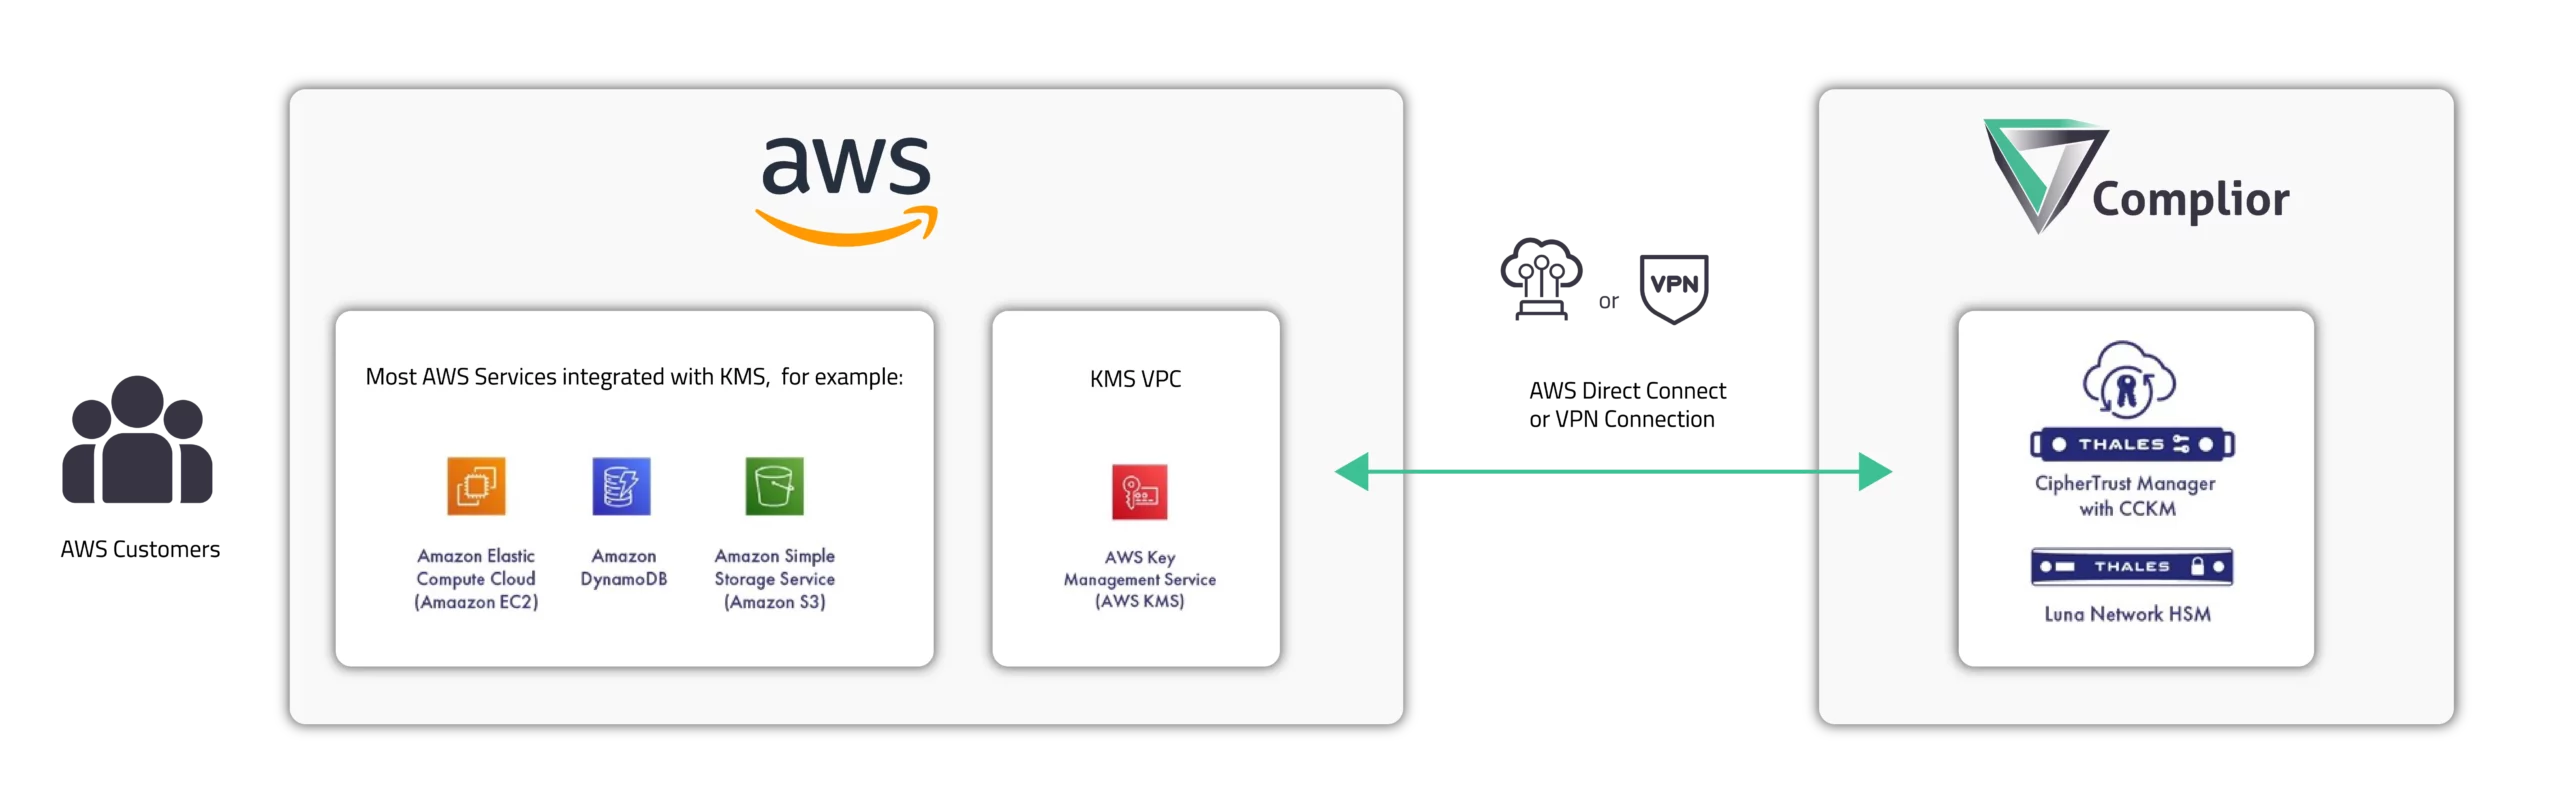 graphics of how AWS XKS works